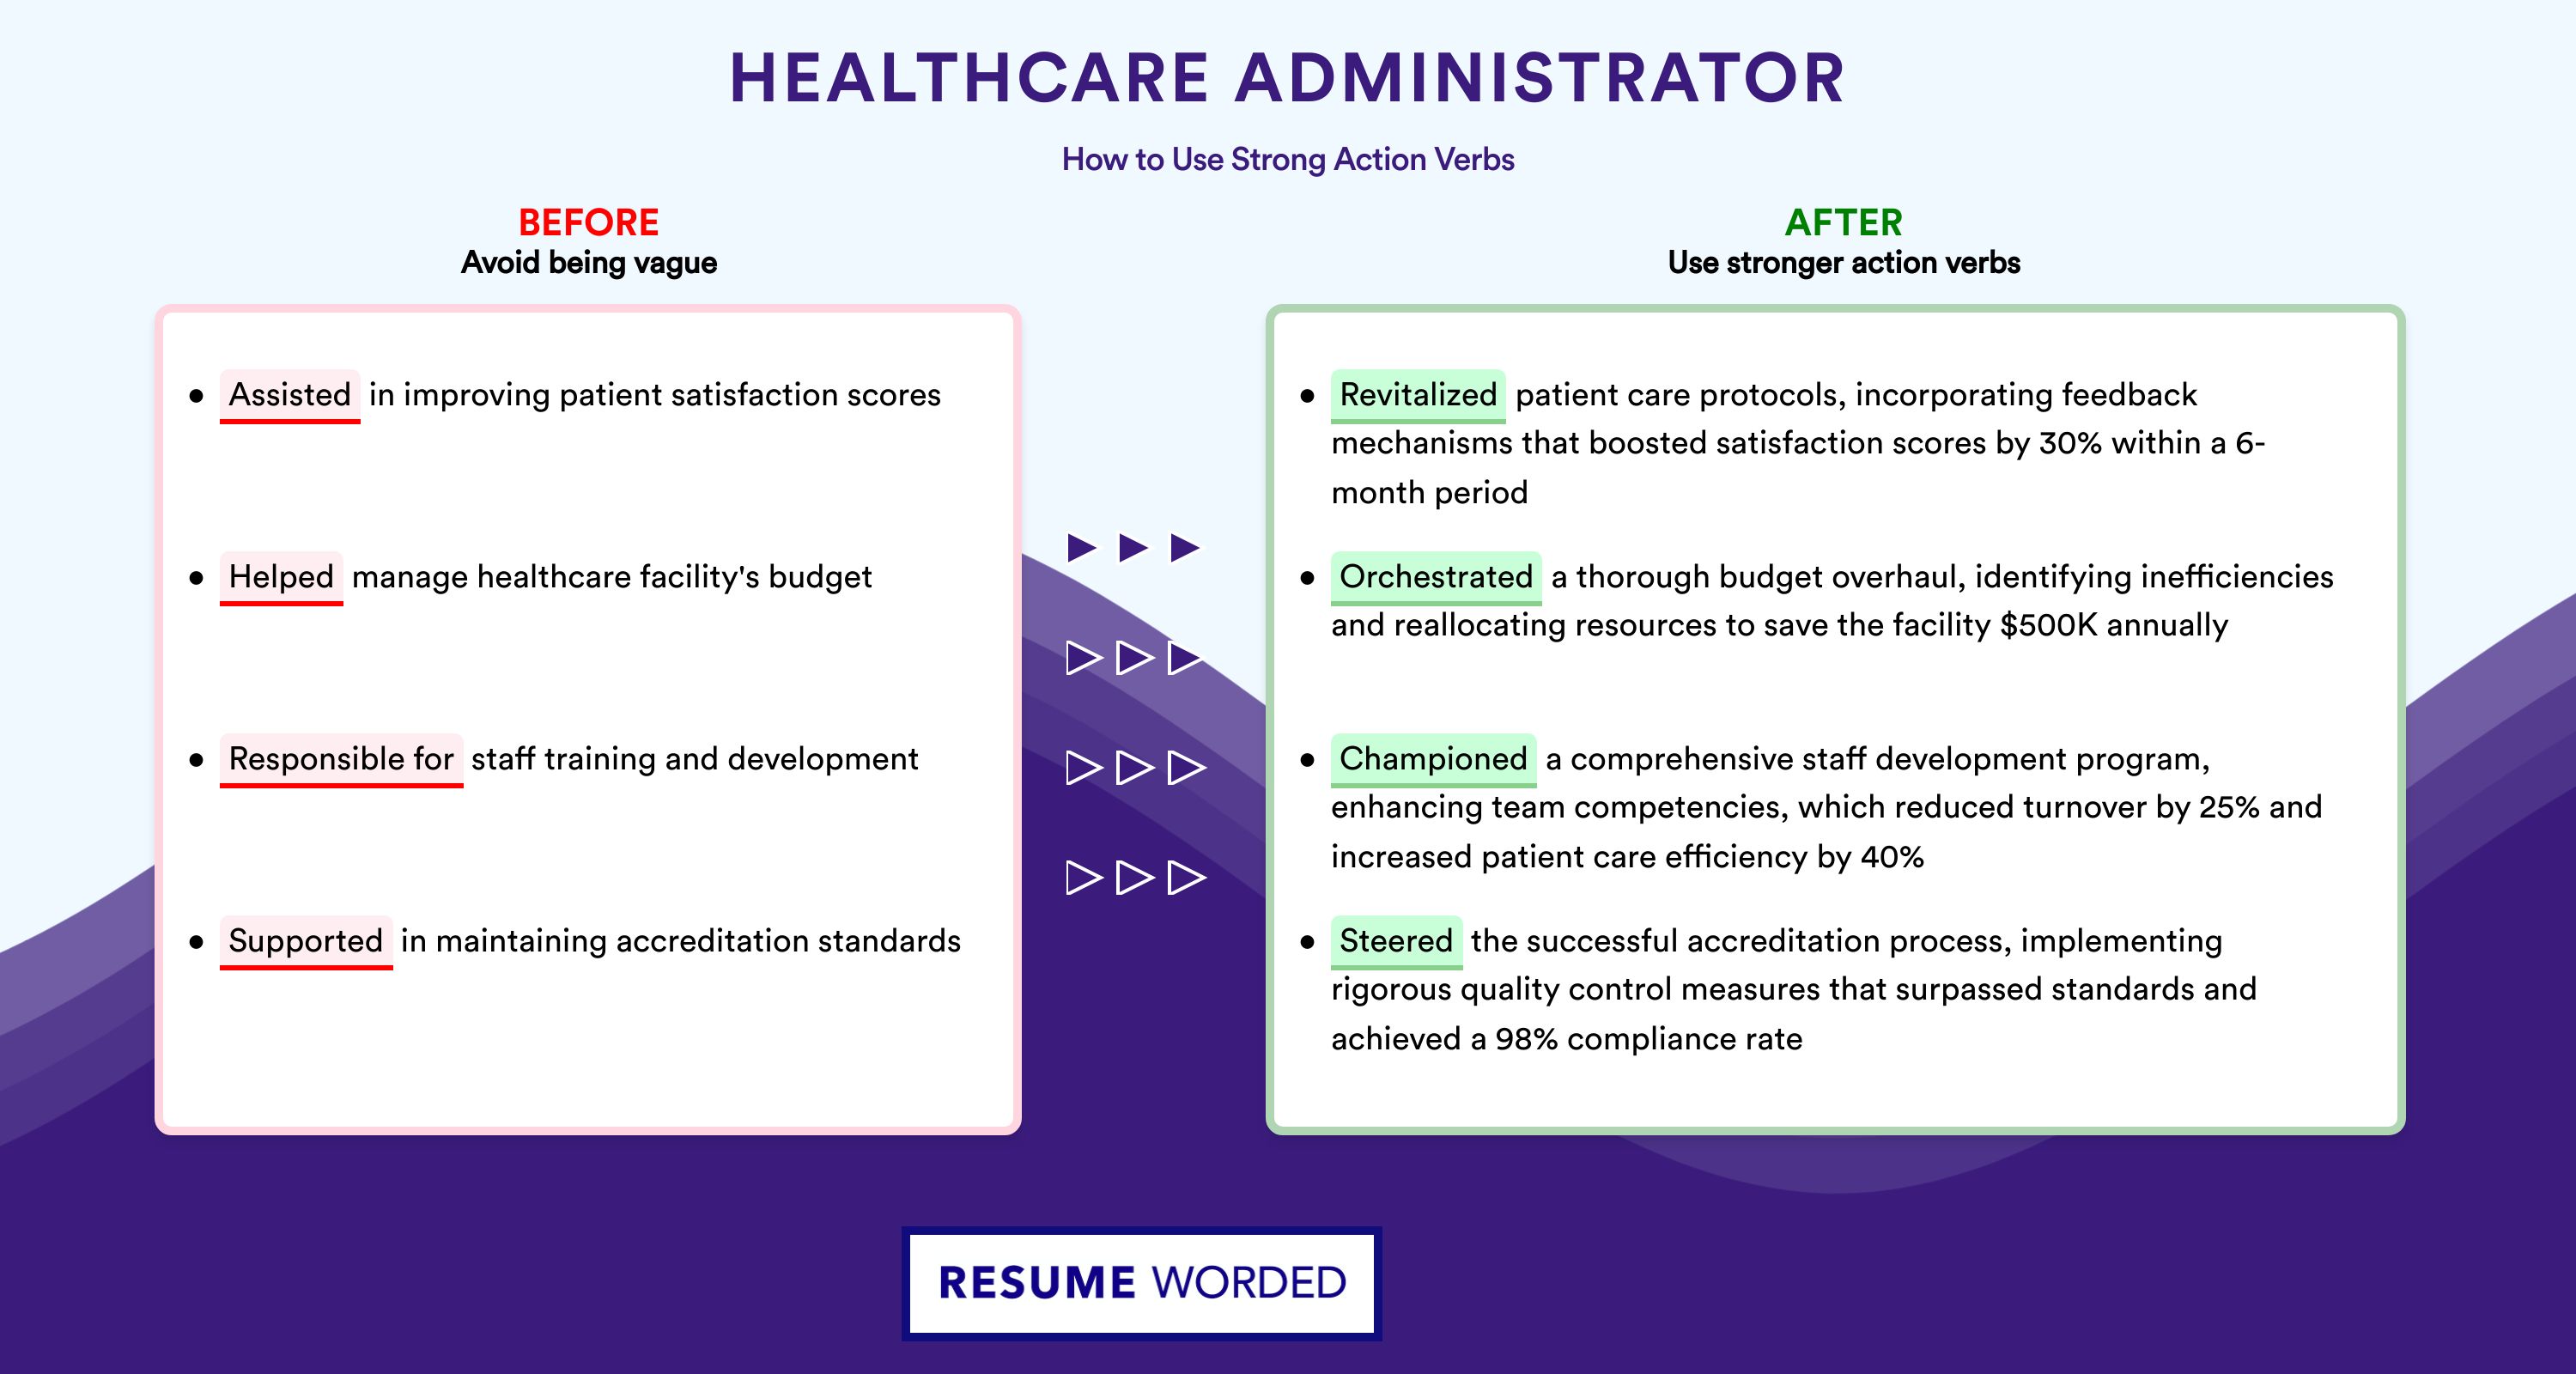 Action Verbs for Healthcare Administrator